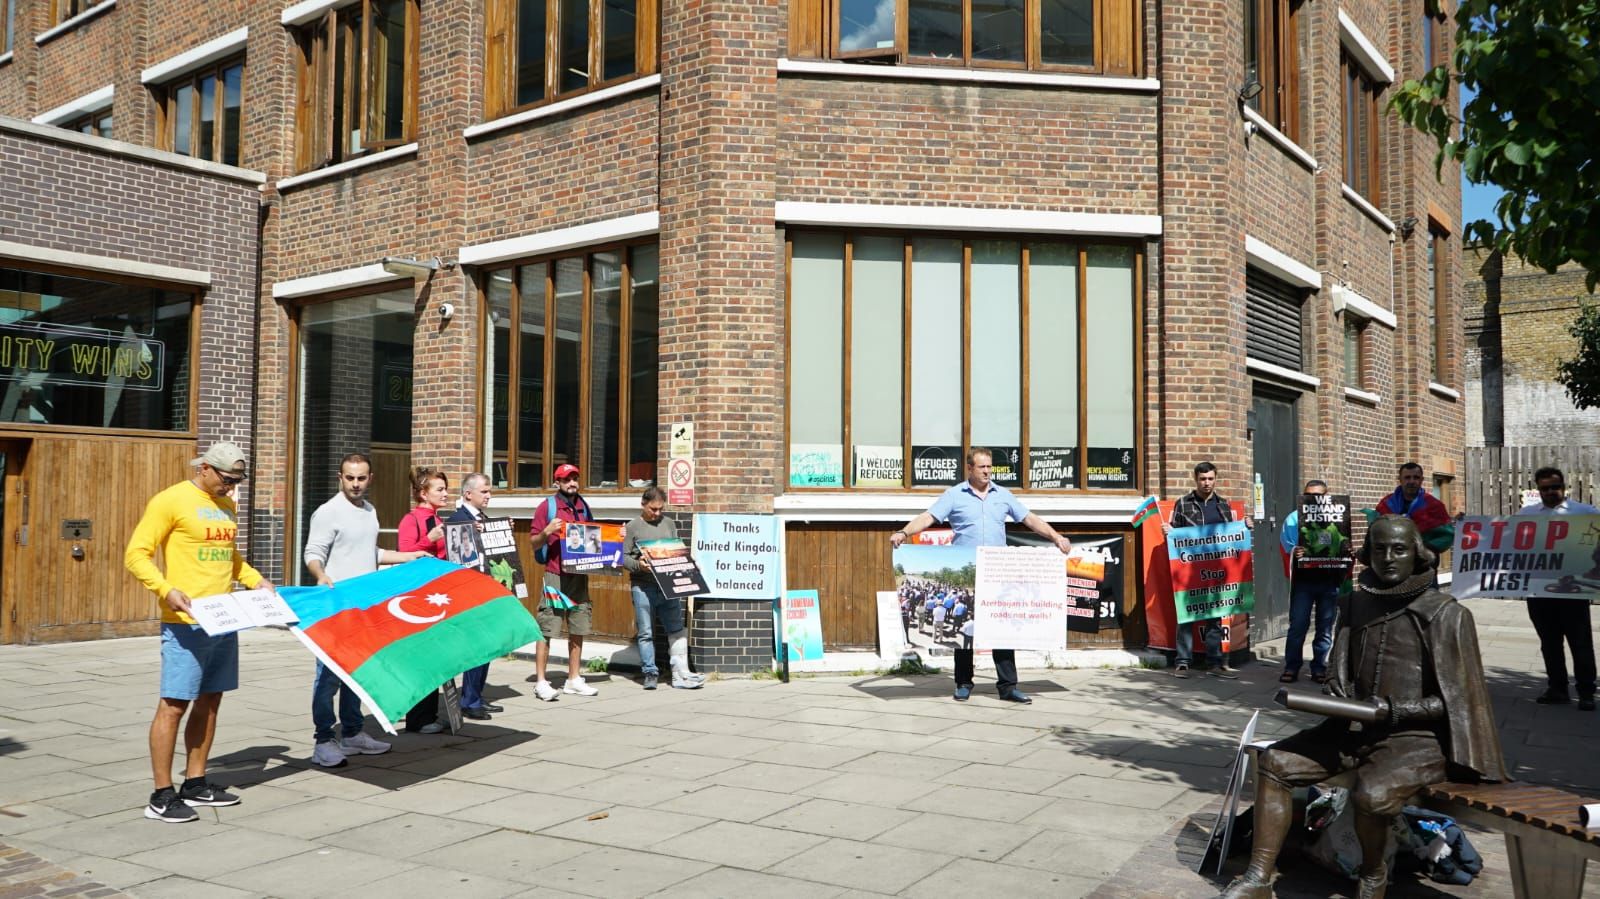 Azerbaijani Community in London protests in front of Amnesty International office [PHOTOS]